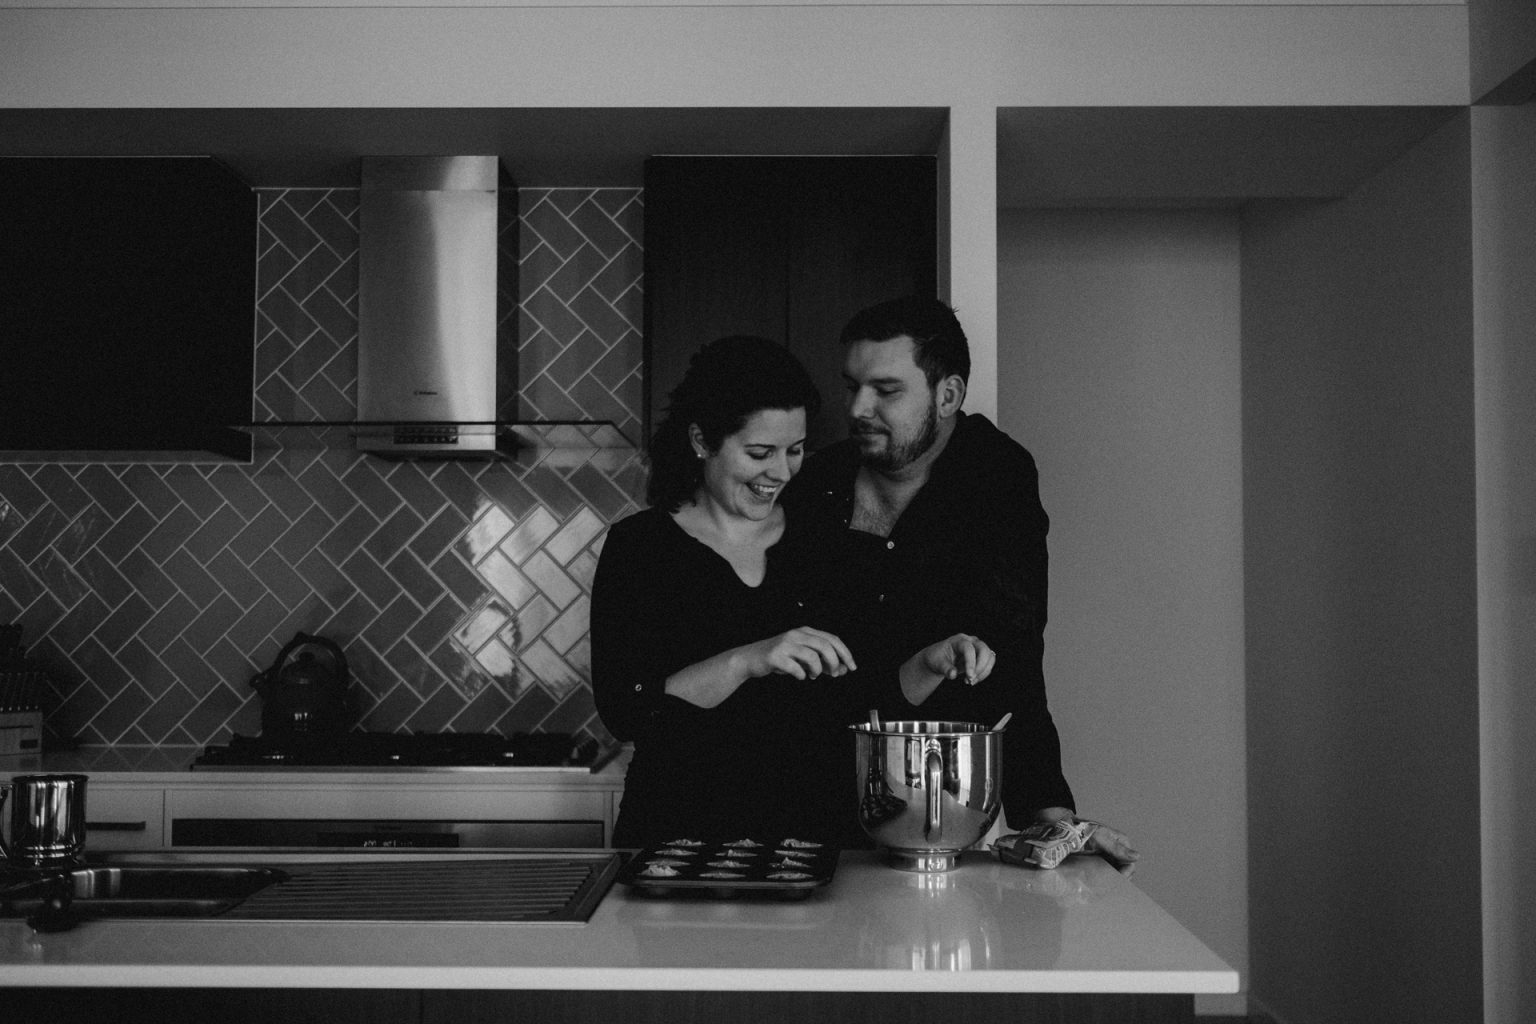 man and woman in kitchen making cupcakes